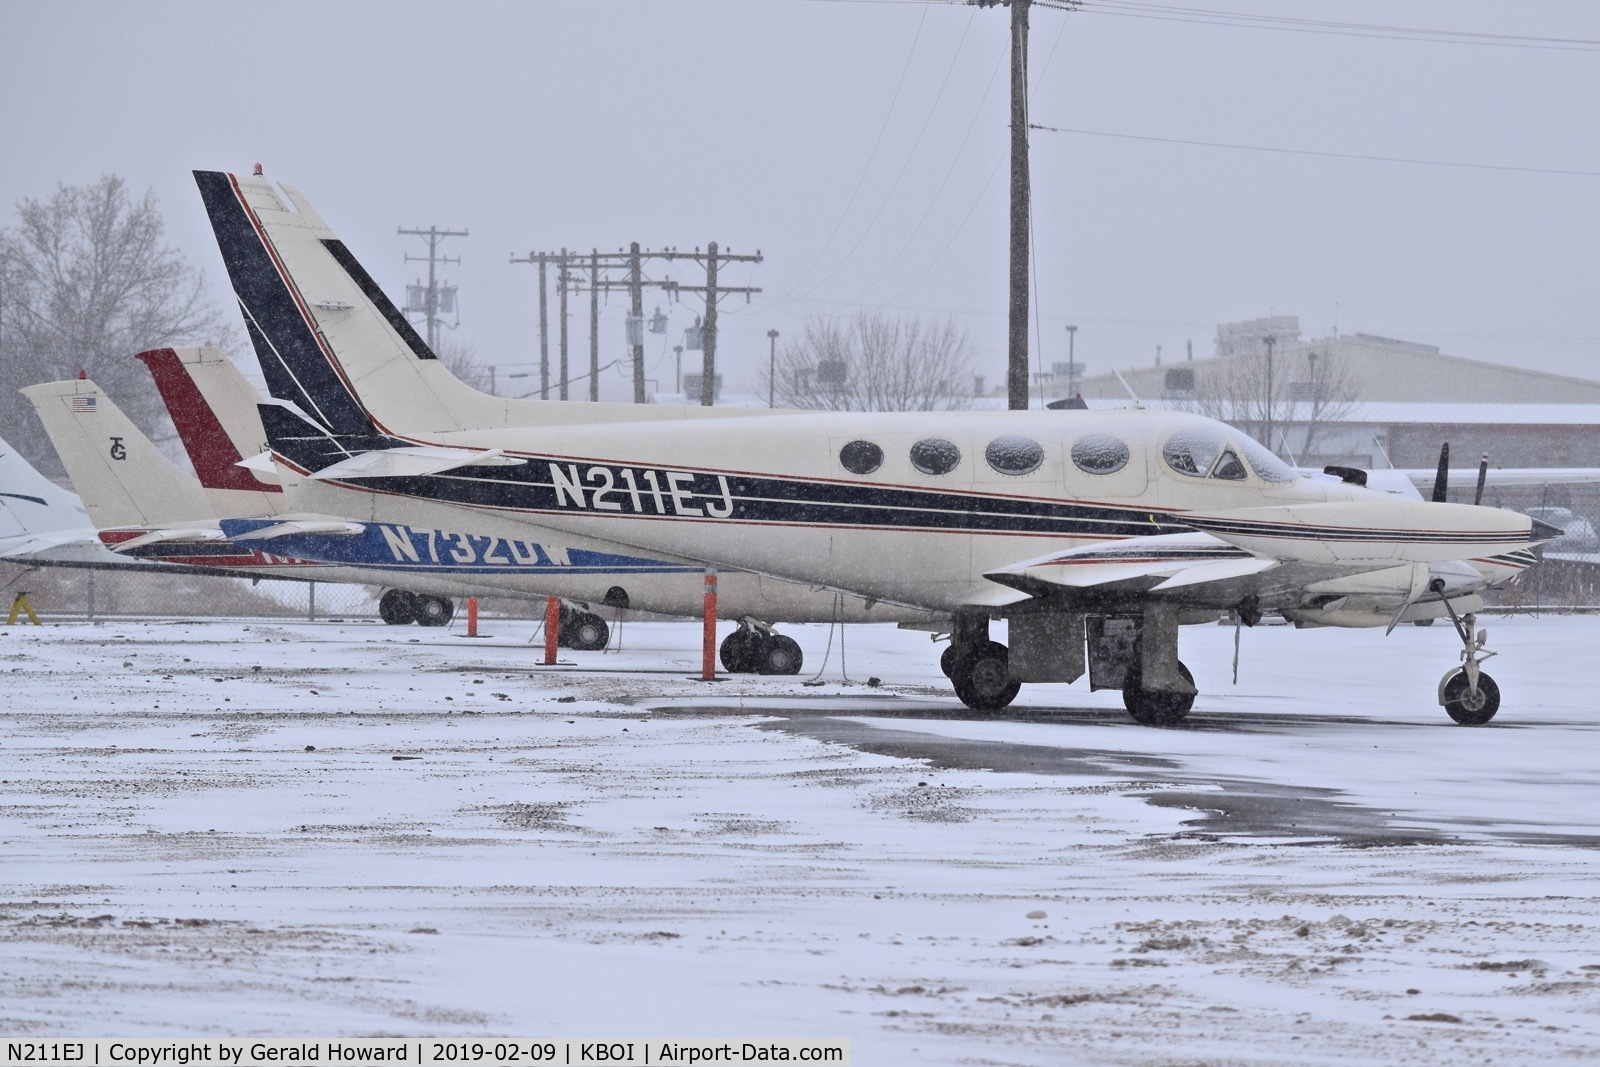 N211EJ, 1978 Cessna 340A C/N 340A0514, Parked for maintenance.